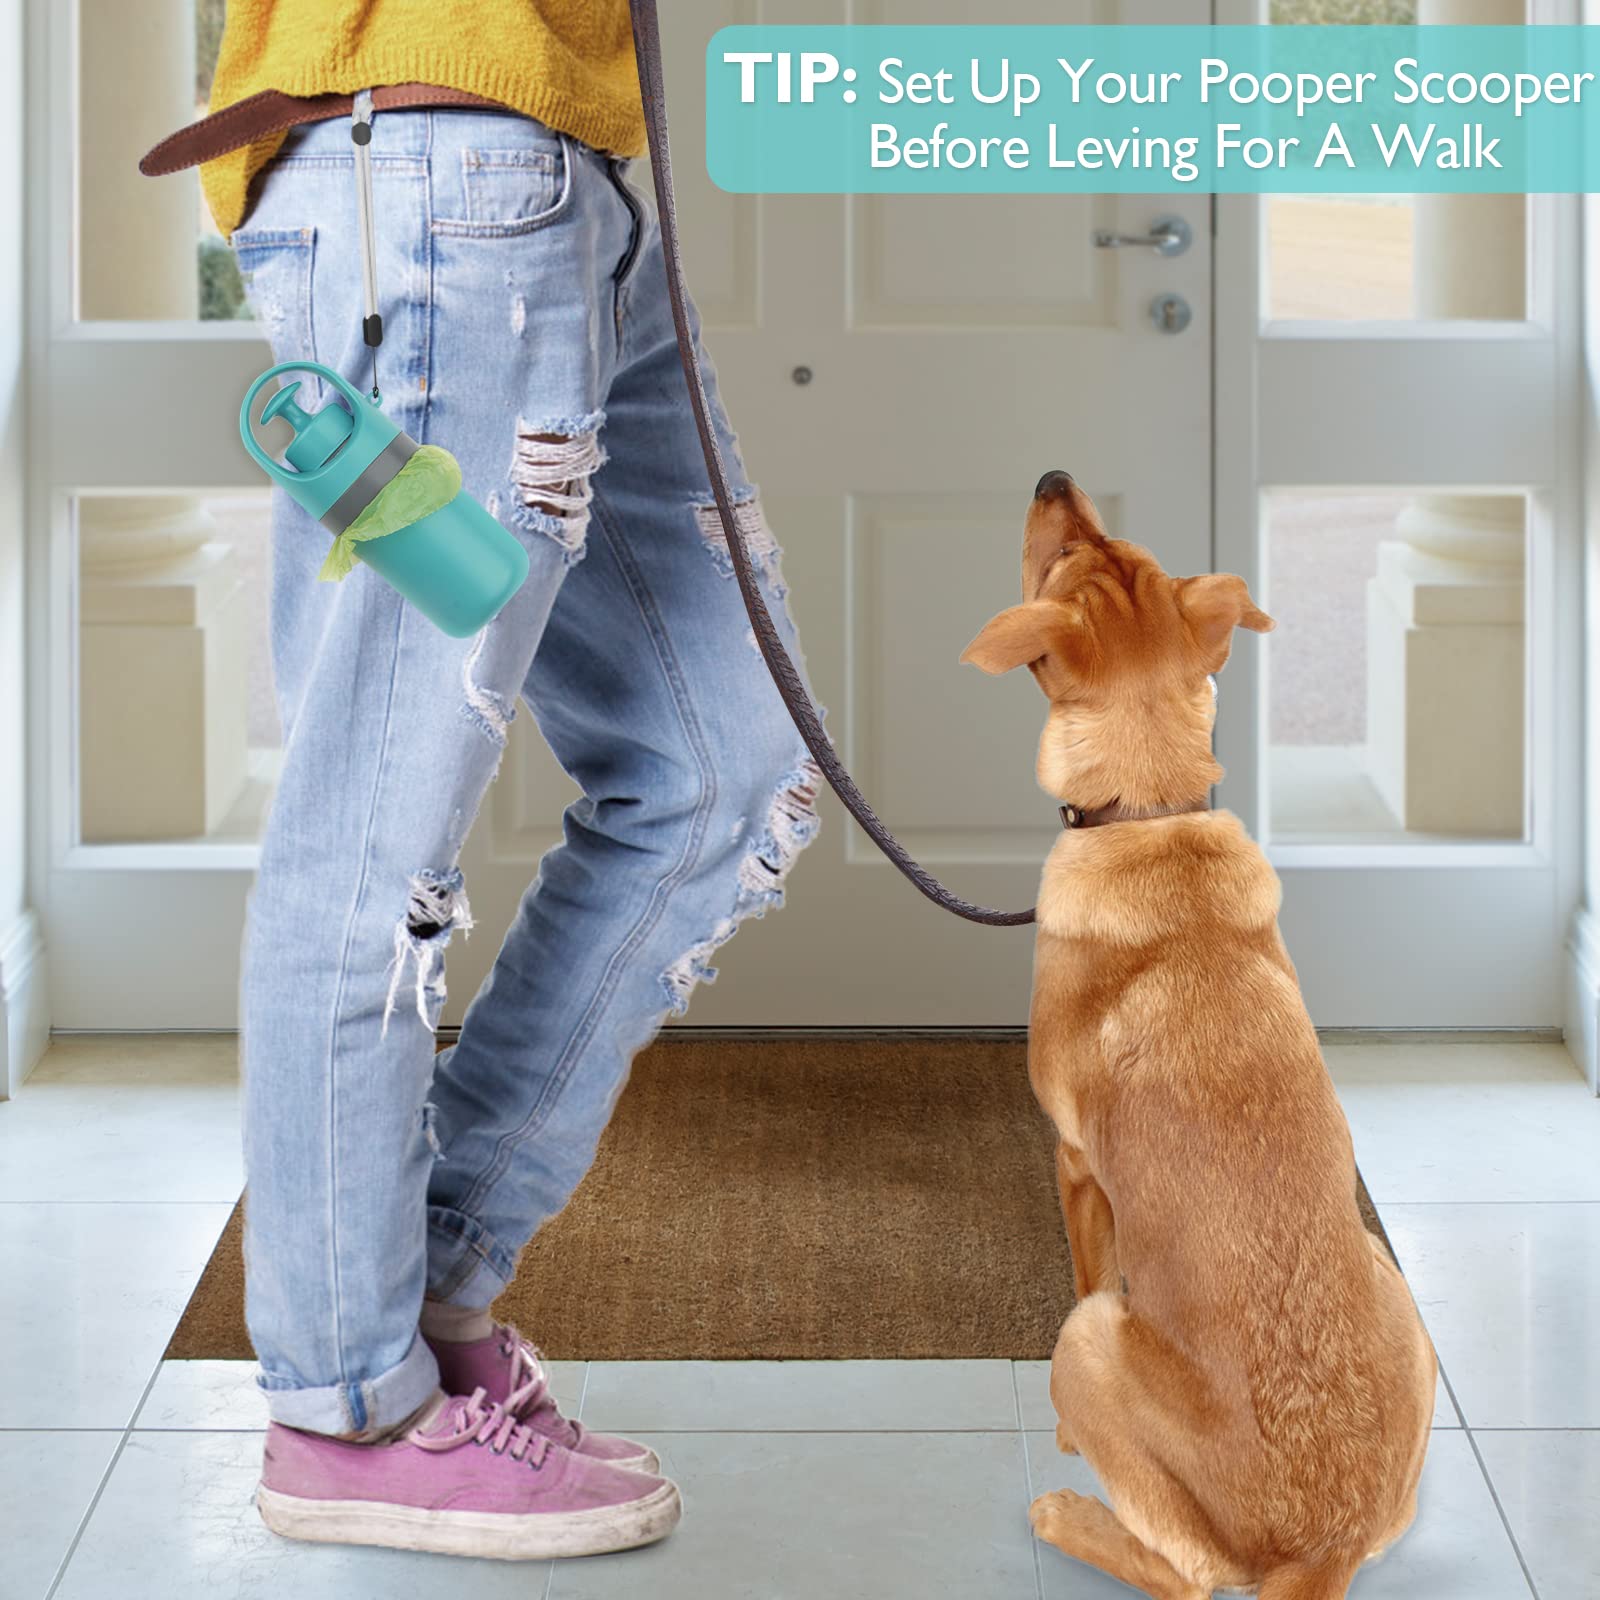 Portable Dog Poop Scooper, Sanitary Dog Waste Picker Upper With Bag Dispenser, Convenient Pet Waste Cleaner For Dog Walkers, Attachable To Dog Leash, Harness Or Waist